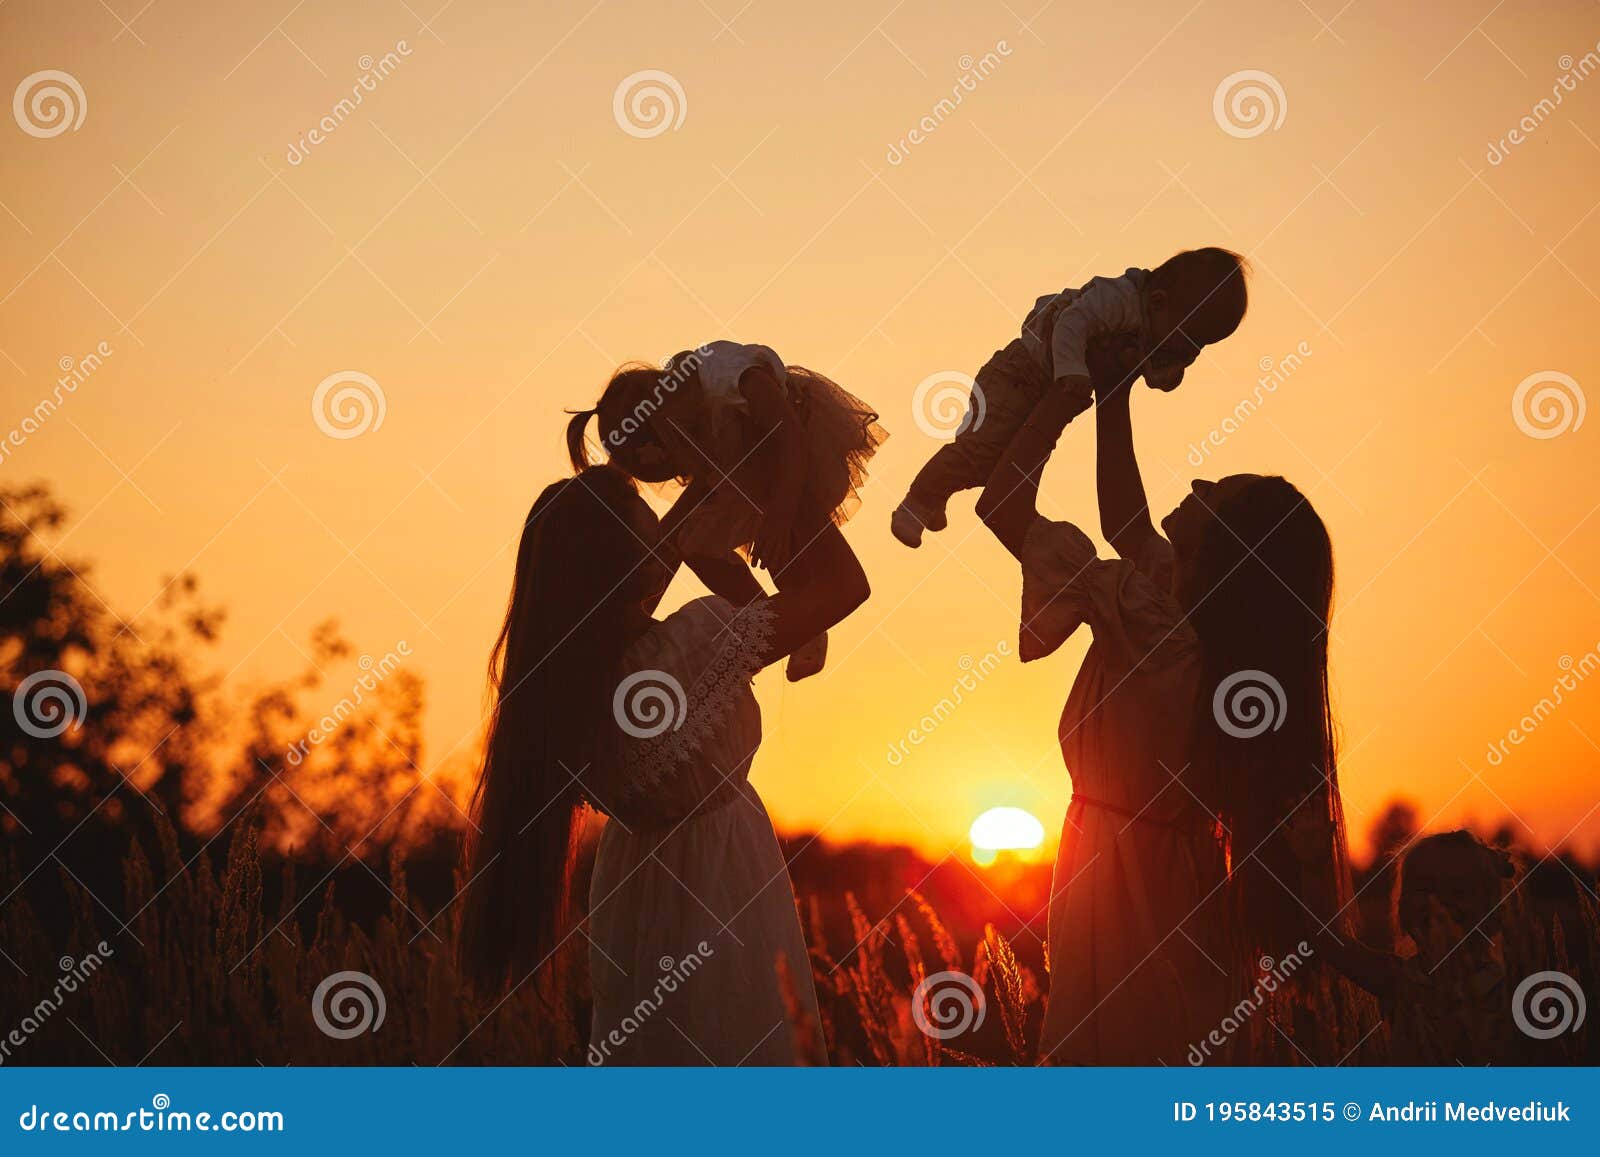 happy young moms playing with their kids outdoors in summer. happy family time together concept. selective focus